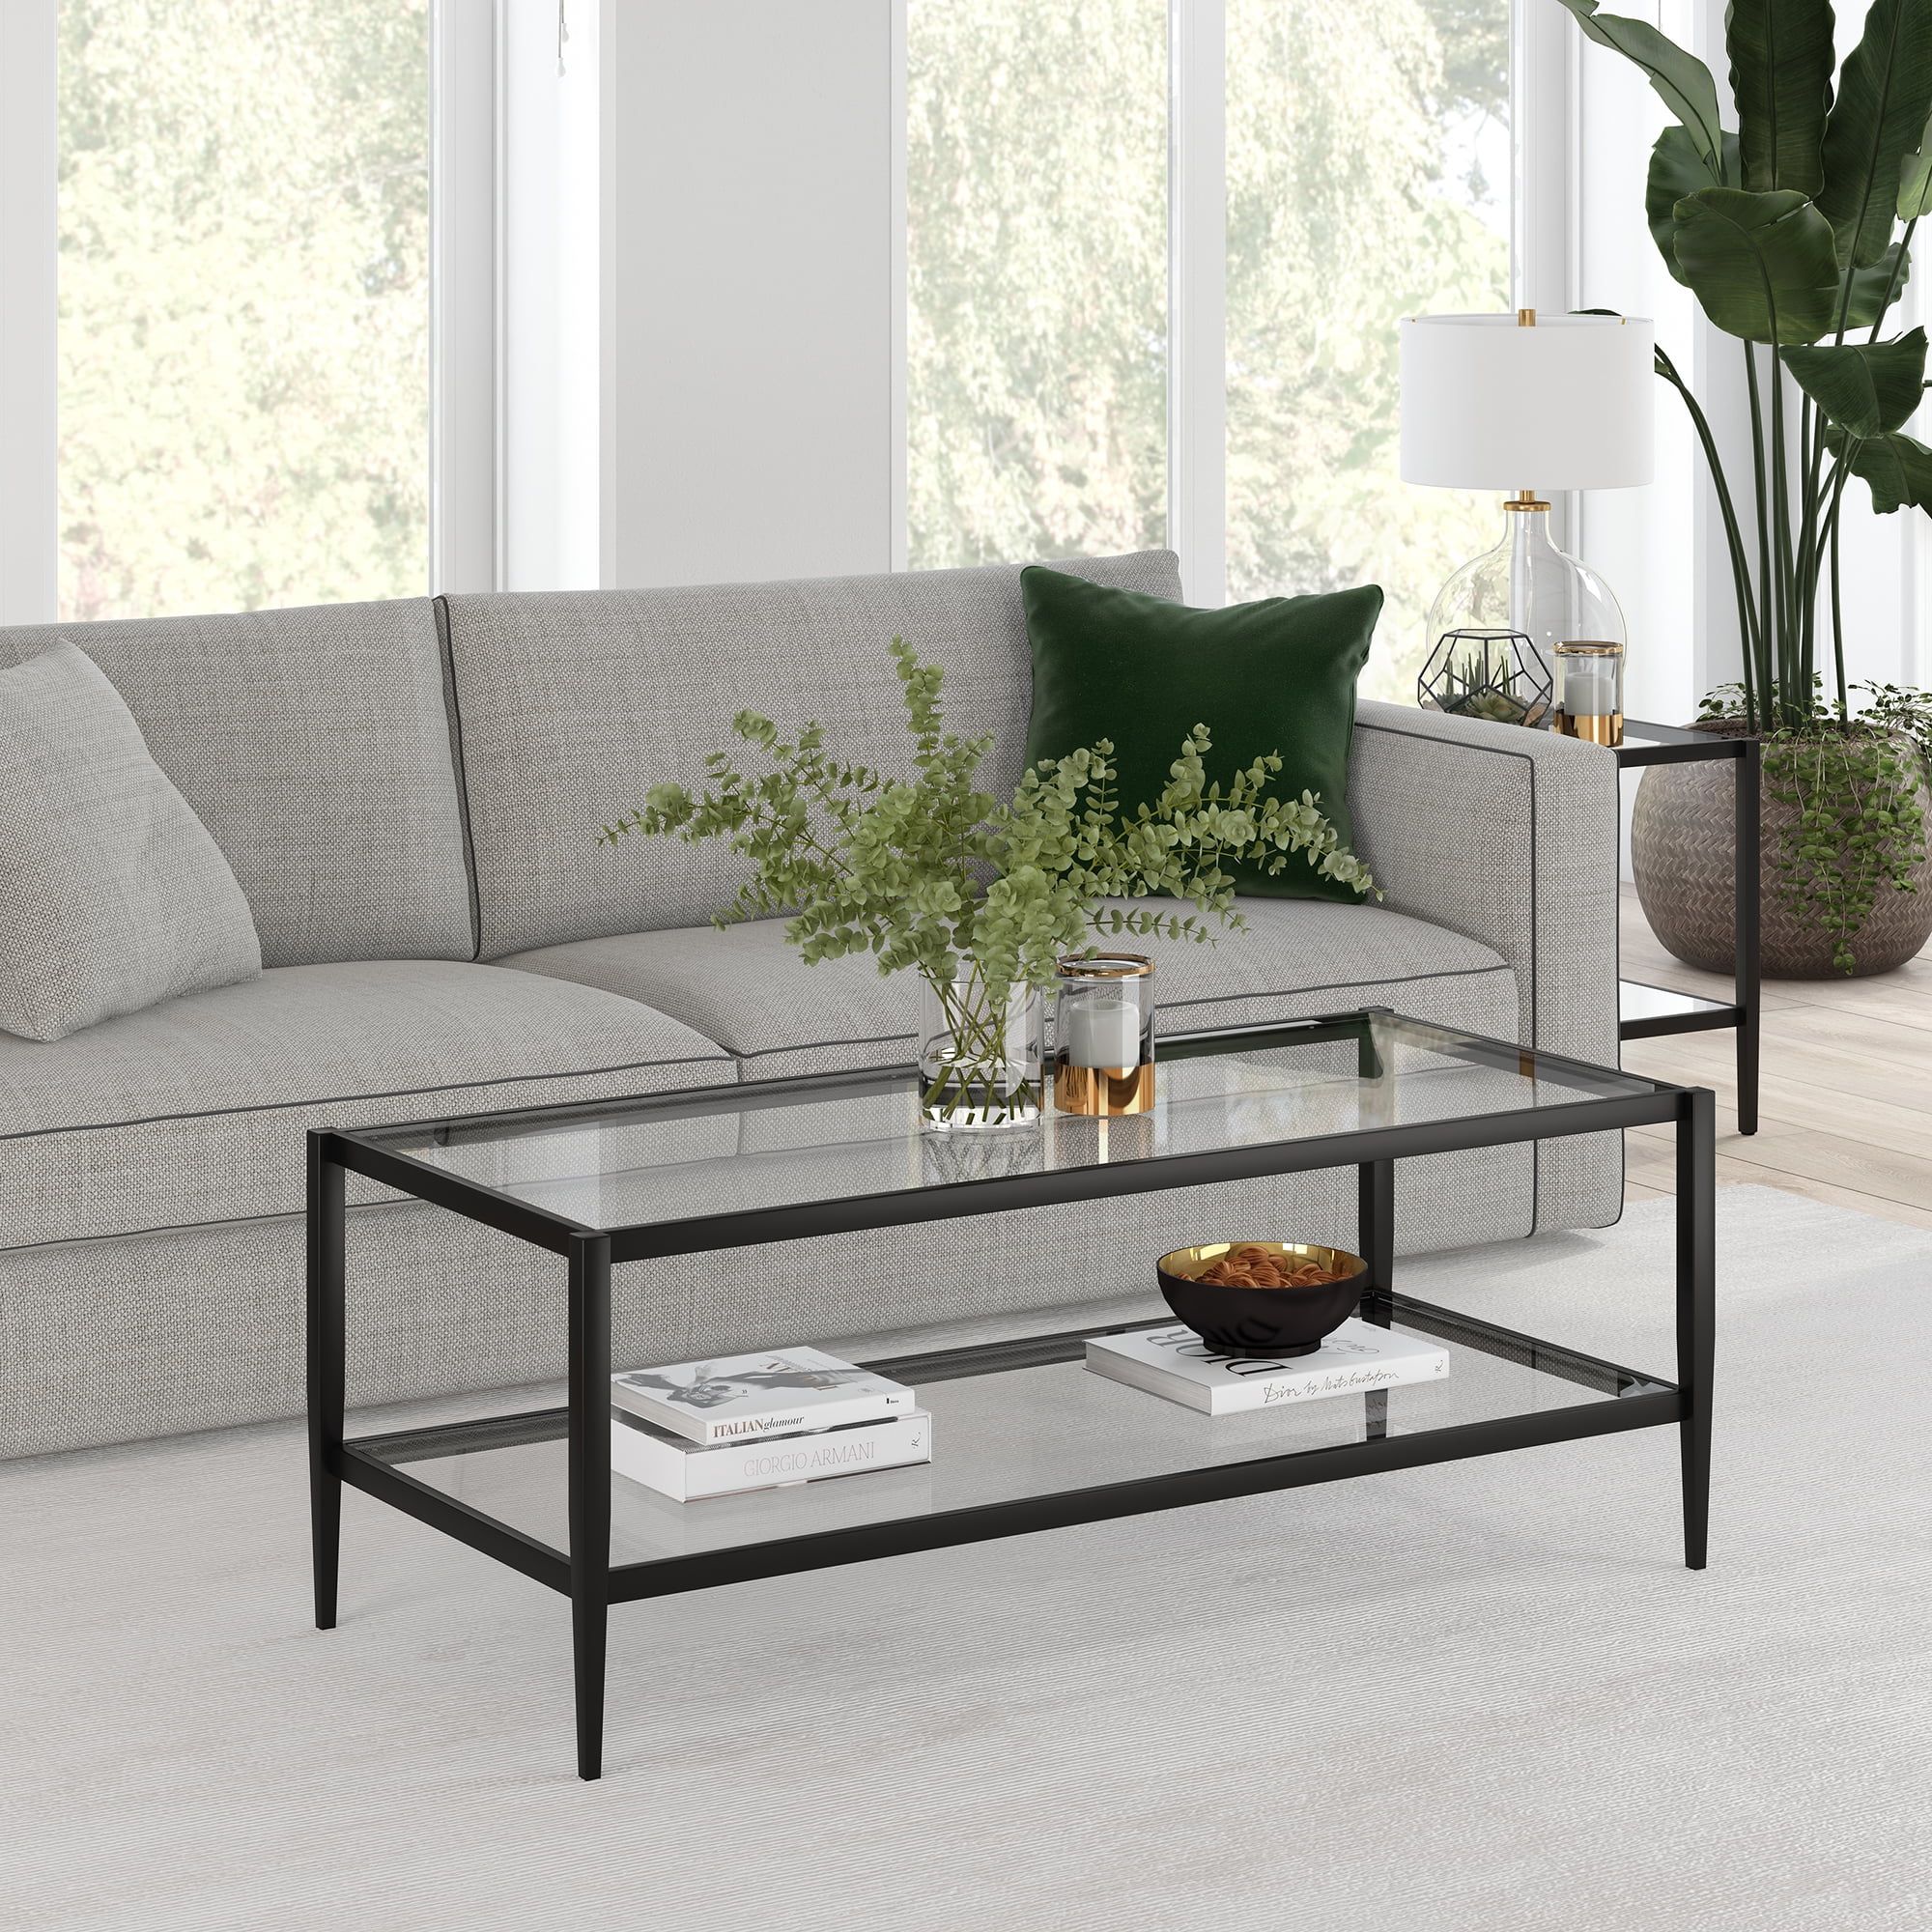 Modern Glass Coffee Table, Rectangular Cocktail Table In Blackened Regarding Rectangular Coffee Tables With Pedestal Bases (View 9 of 15)